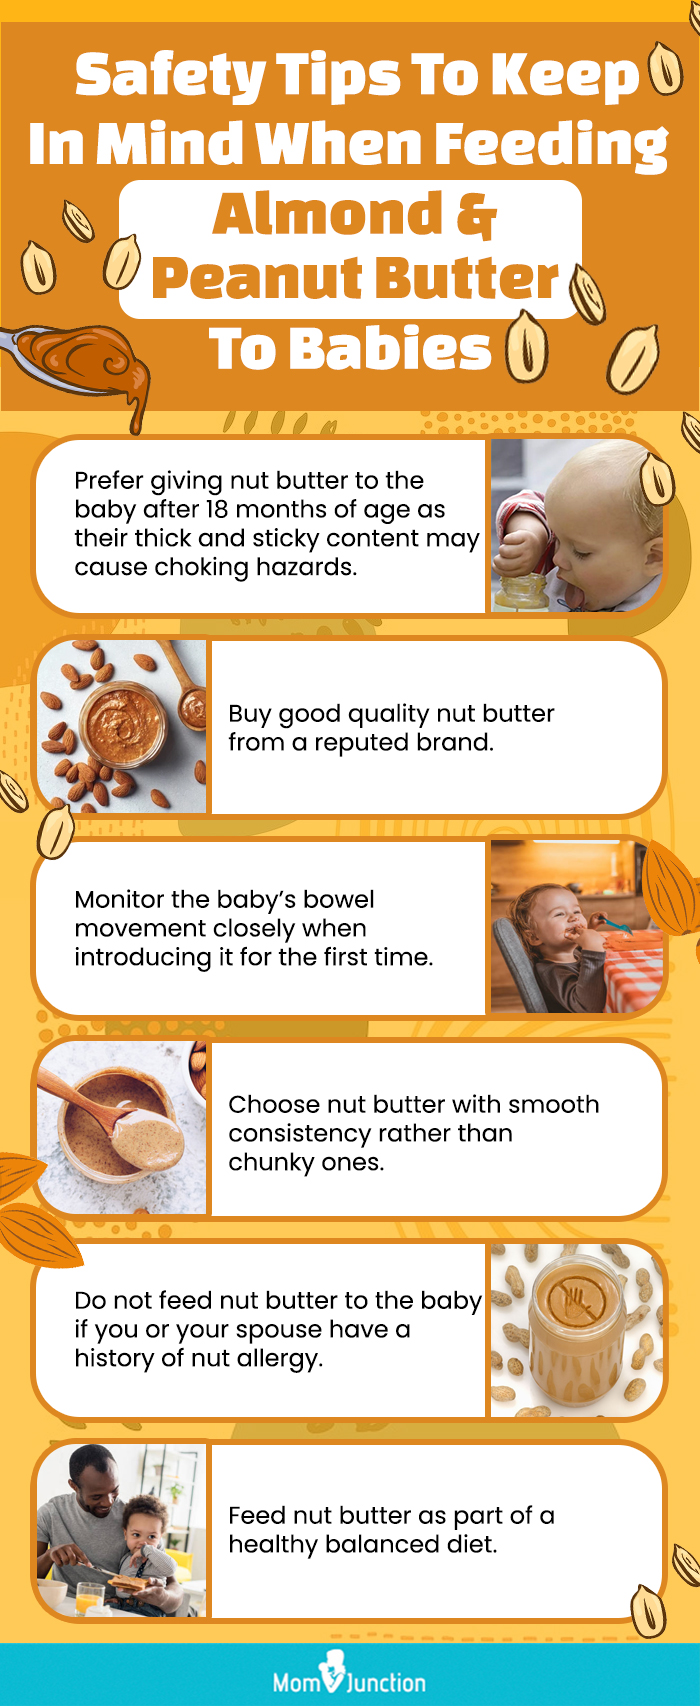 safety tips to keep in mind when feeding almond & peanut butter to babies (infographic)